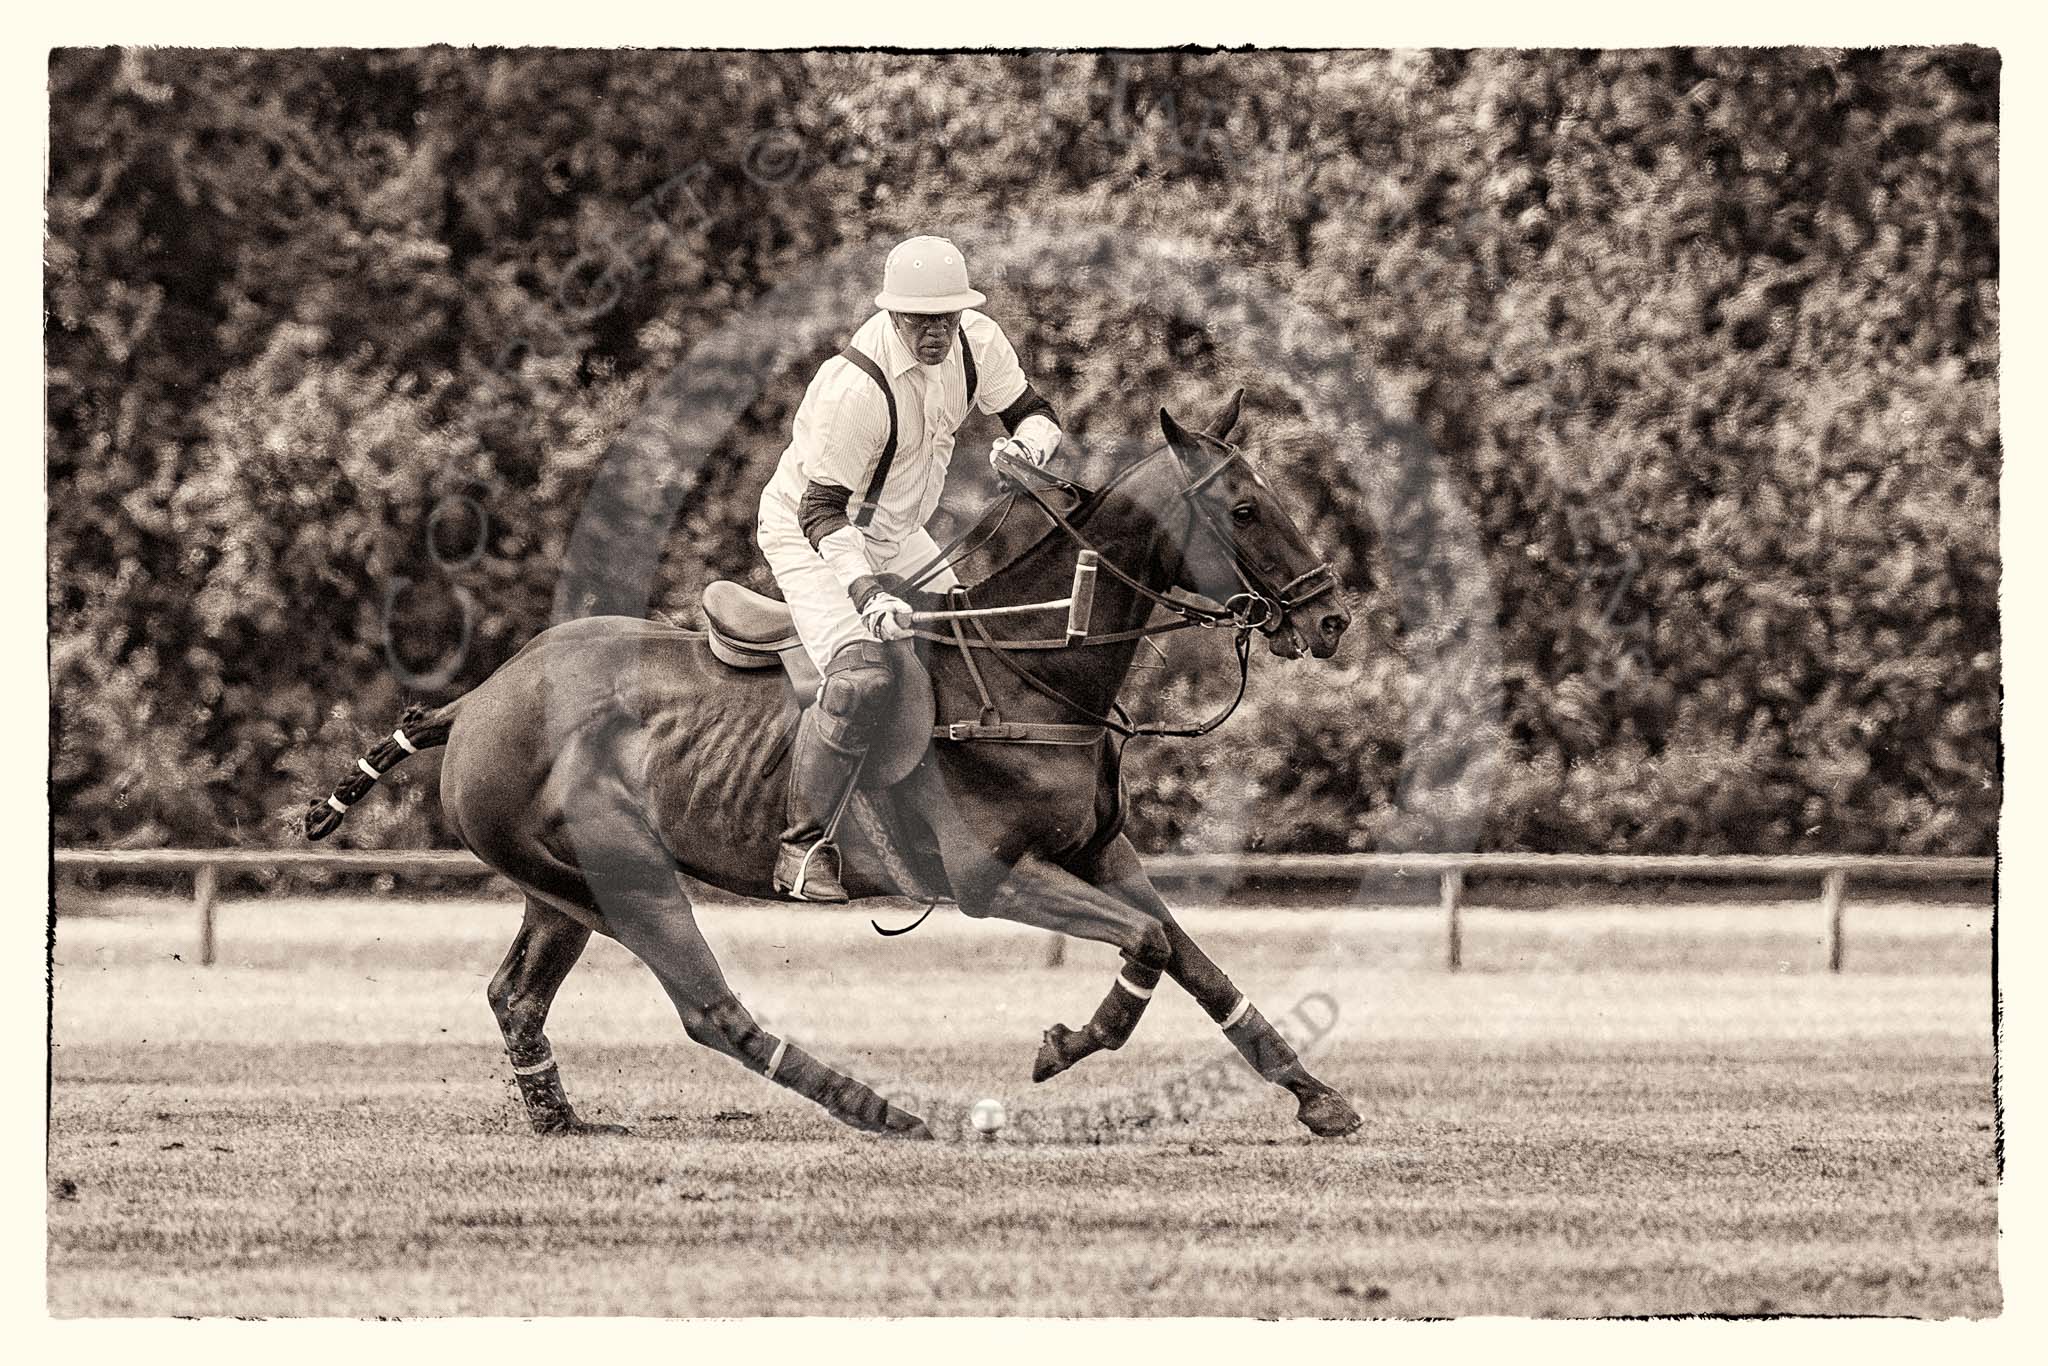 7th Heritage Polo Cup finals: Mariano Darrichton, La Mariposa Argentina.
Hurtwood Park Polo Club,
Ewhurst Green,
Surrey,
United Kingdom,
on 05 August 2012 at 13:23, image #18